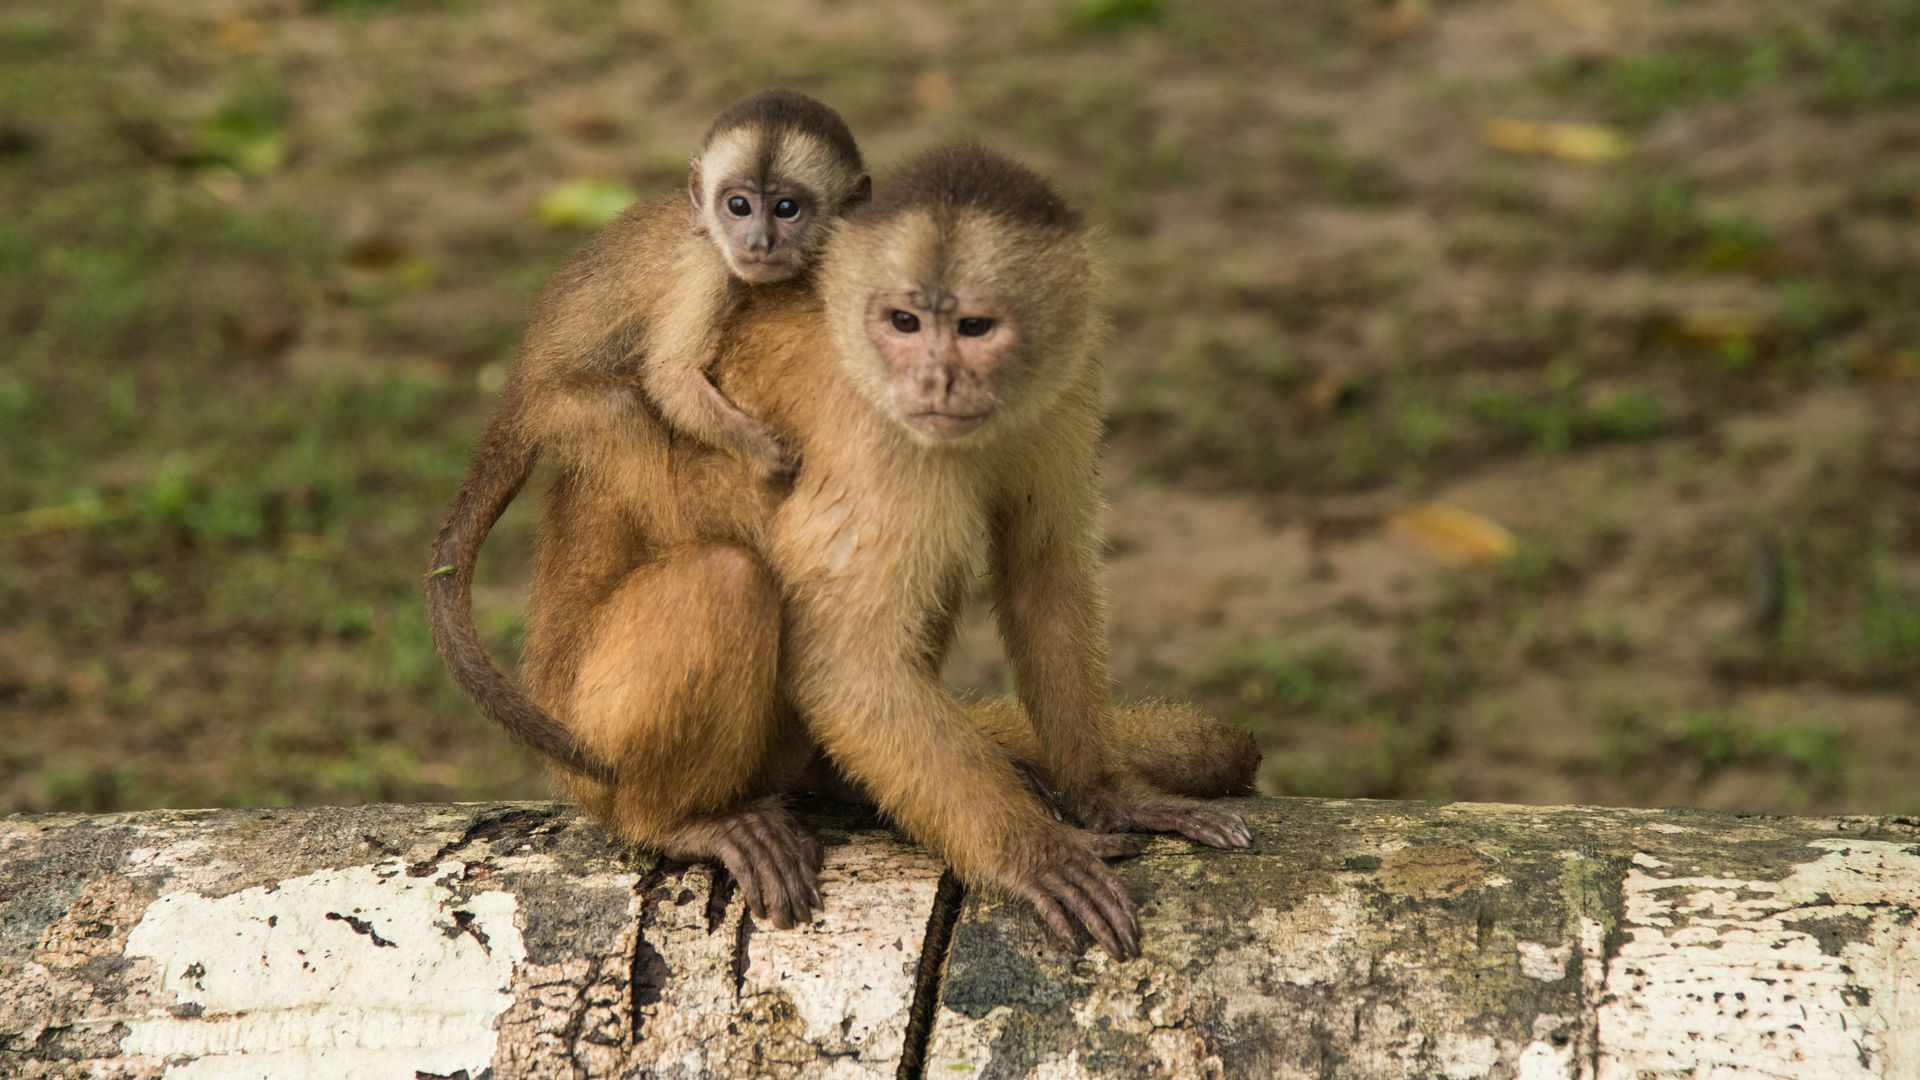 Capuchin monkeys in Peru. They are among the most illegally trafficked species in the country. Photo: Education Images/Universal Images Group via Getty Images